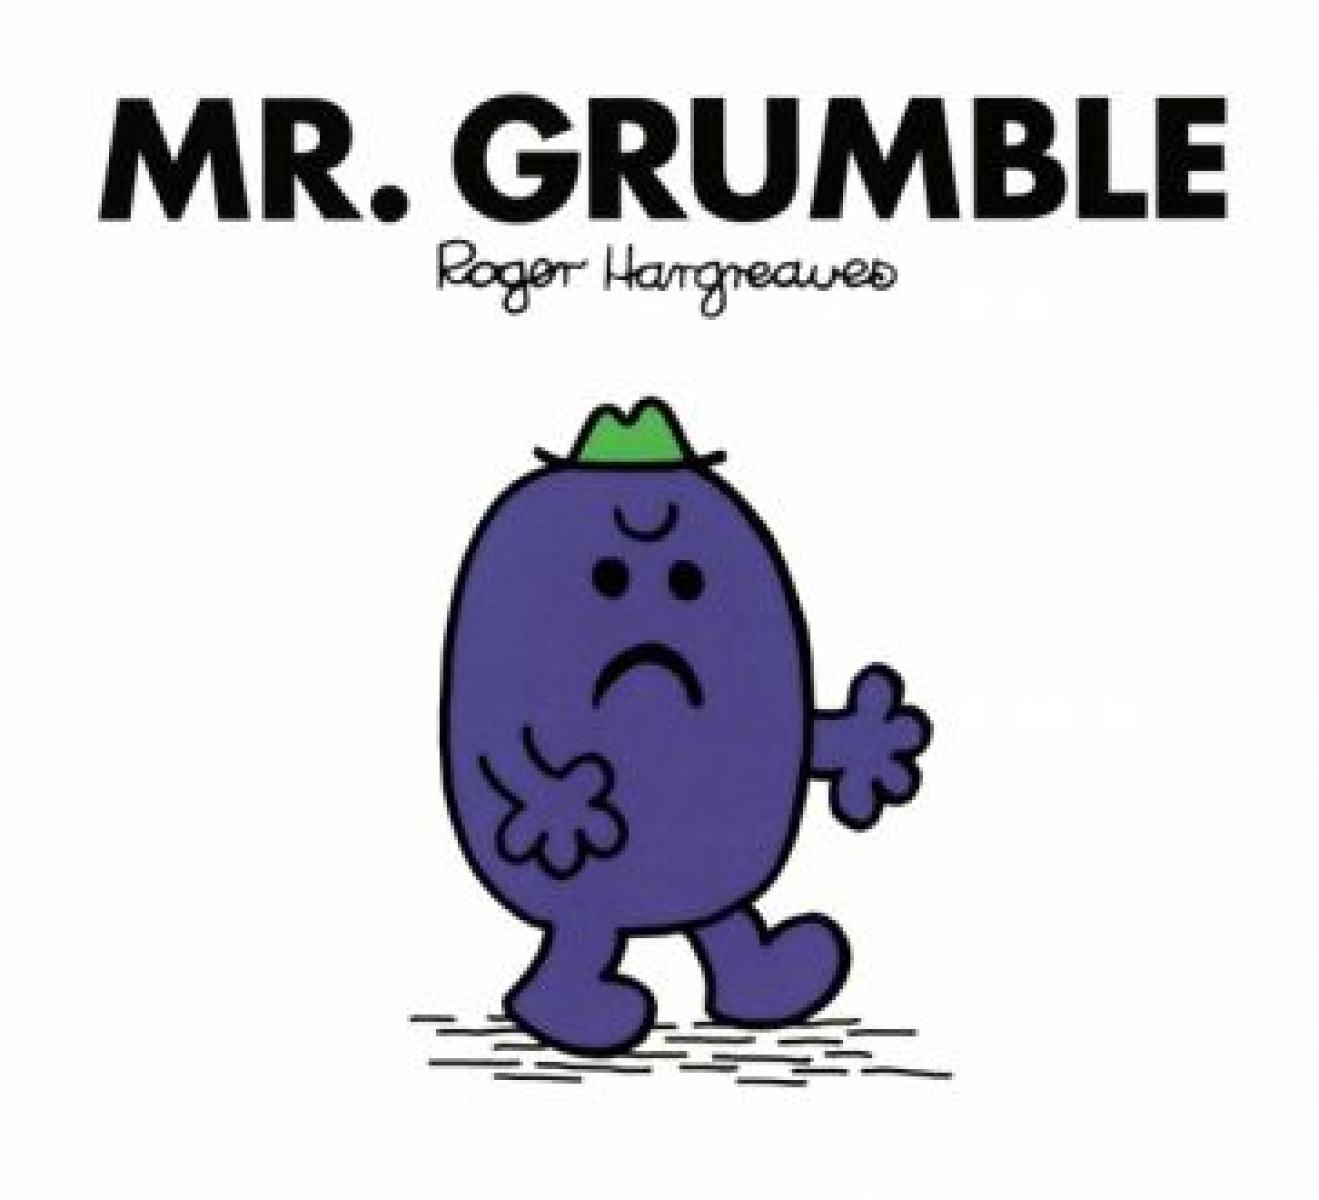 Hargreaves Roger Mr. Grumble 